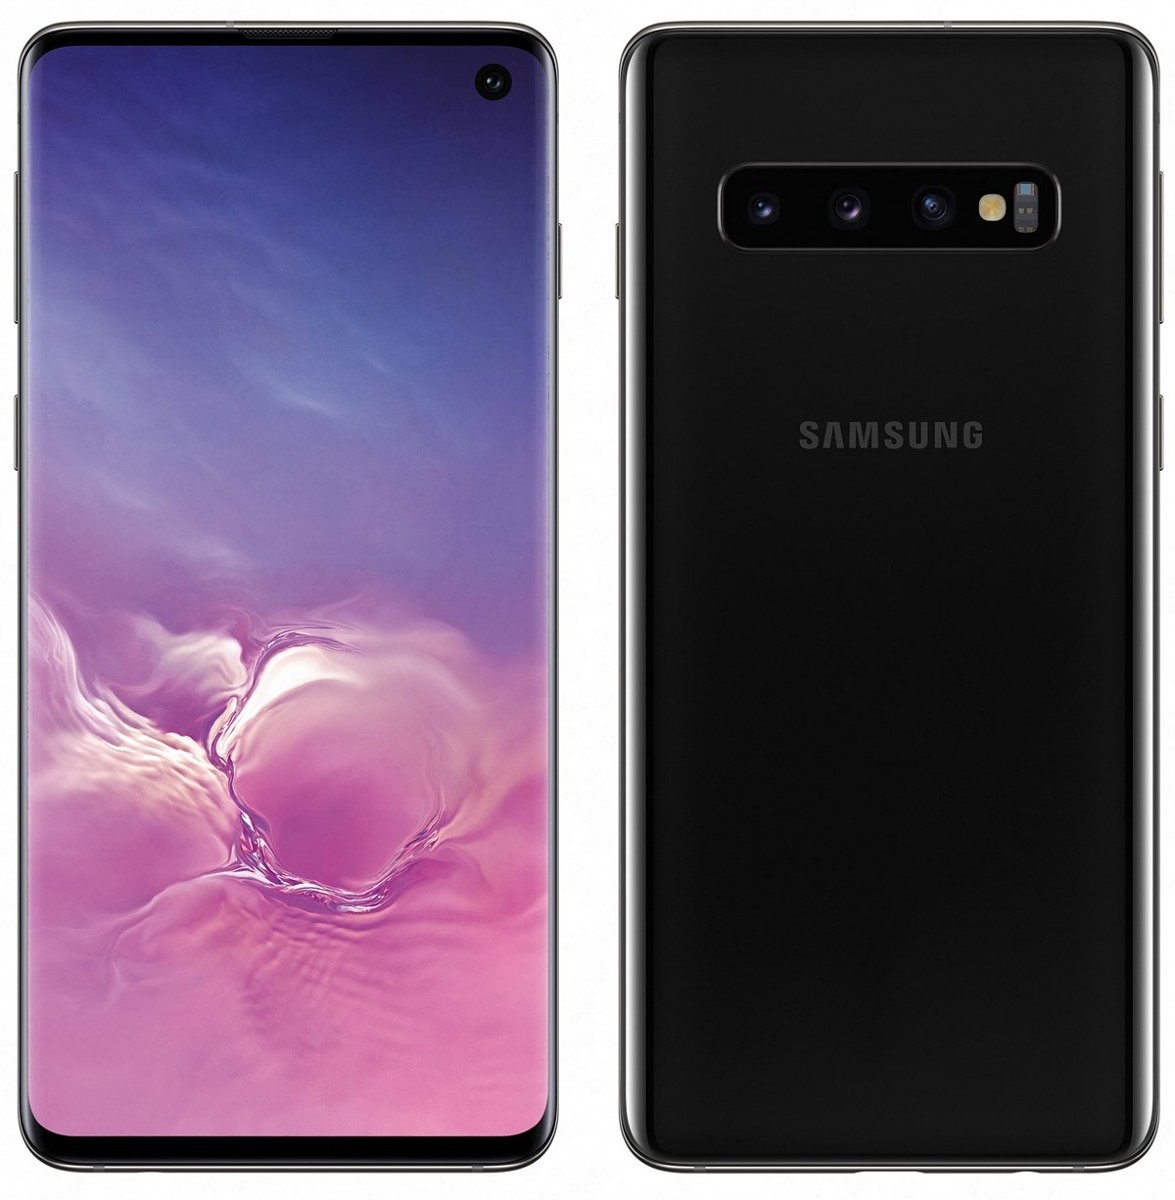 Galaxy S10 Model Numbers